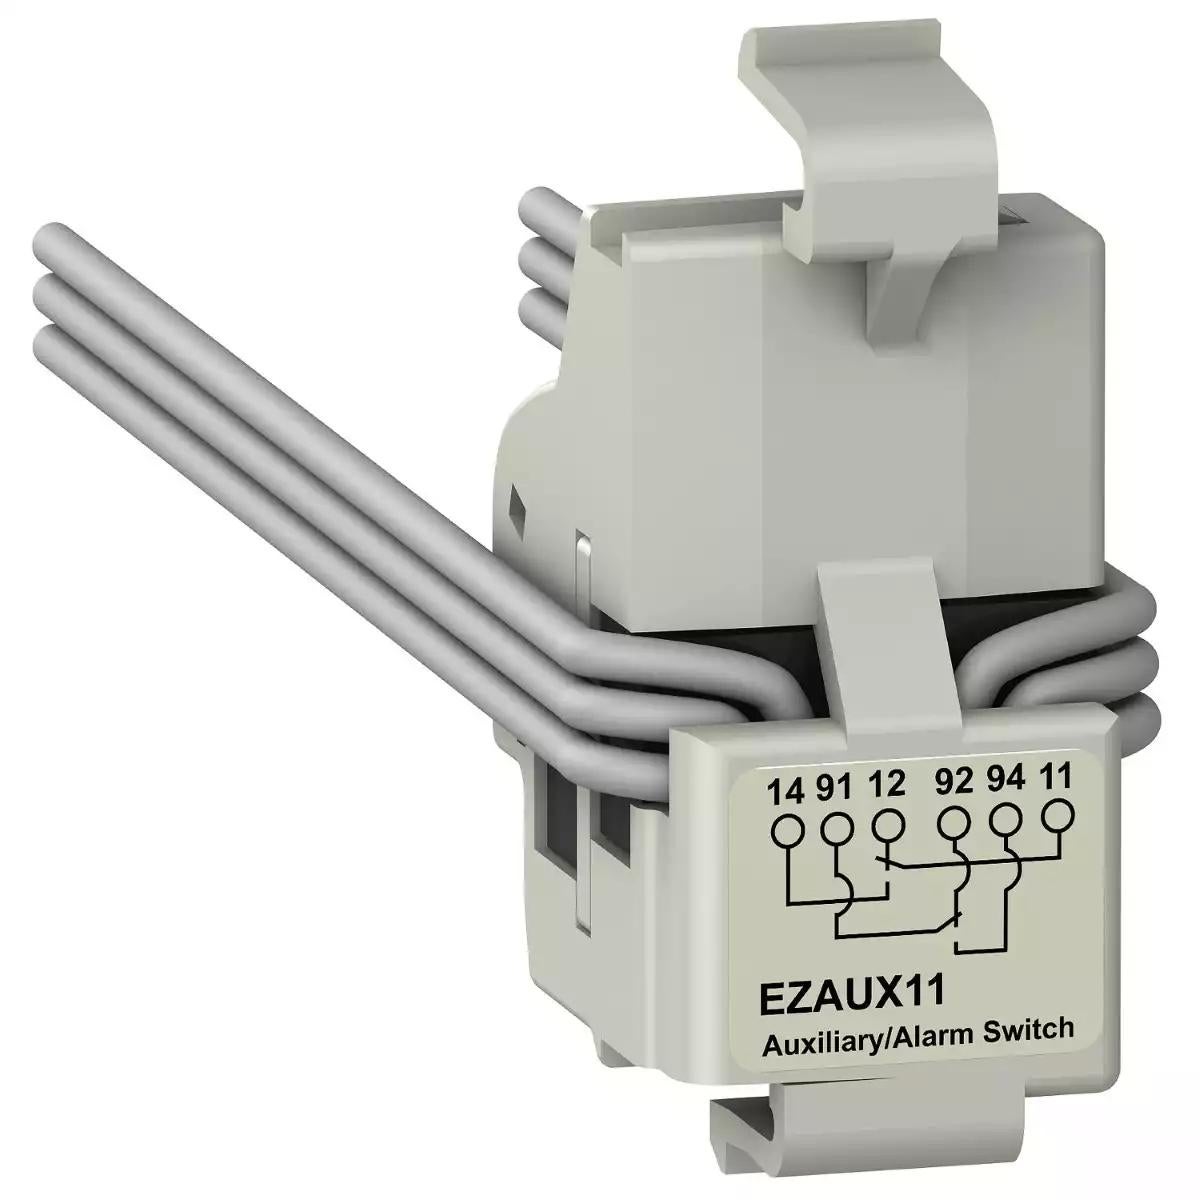 Schneider Electric EasyPact EZC auxiliary and alarm switch AL AX, EasyPact EZC 100, EasyPact CVS 100BS, 2 common point changeover contacts